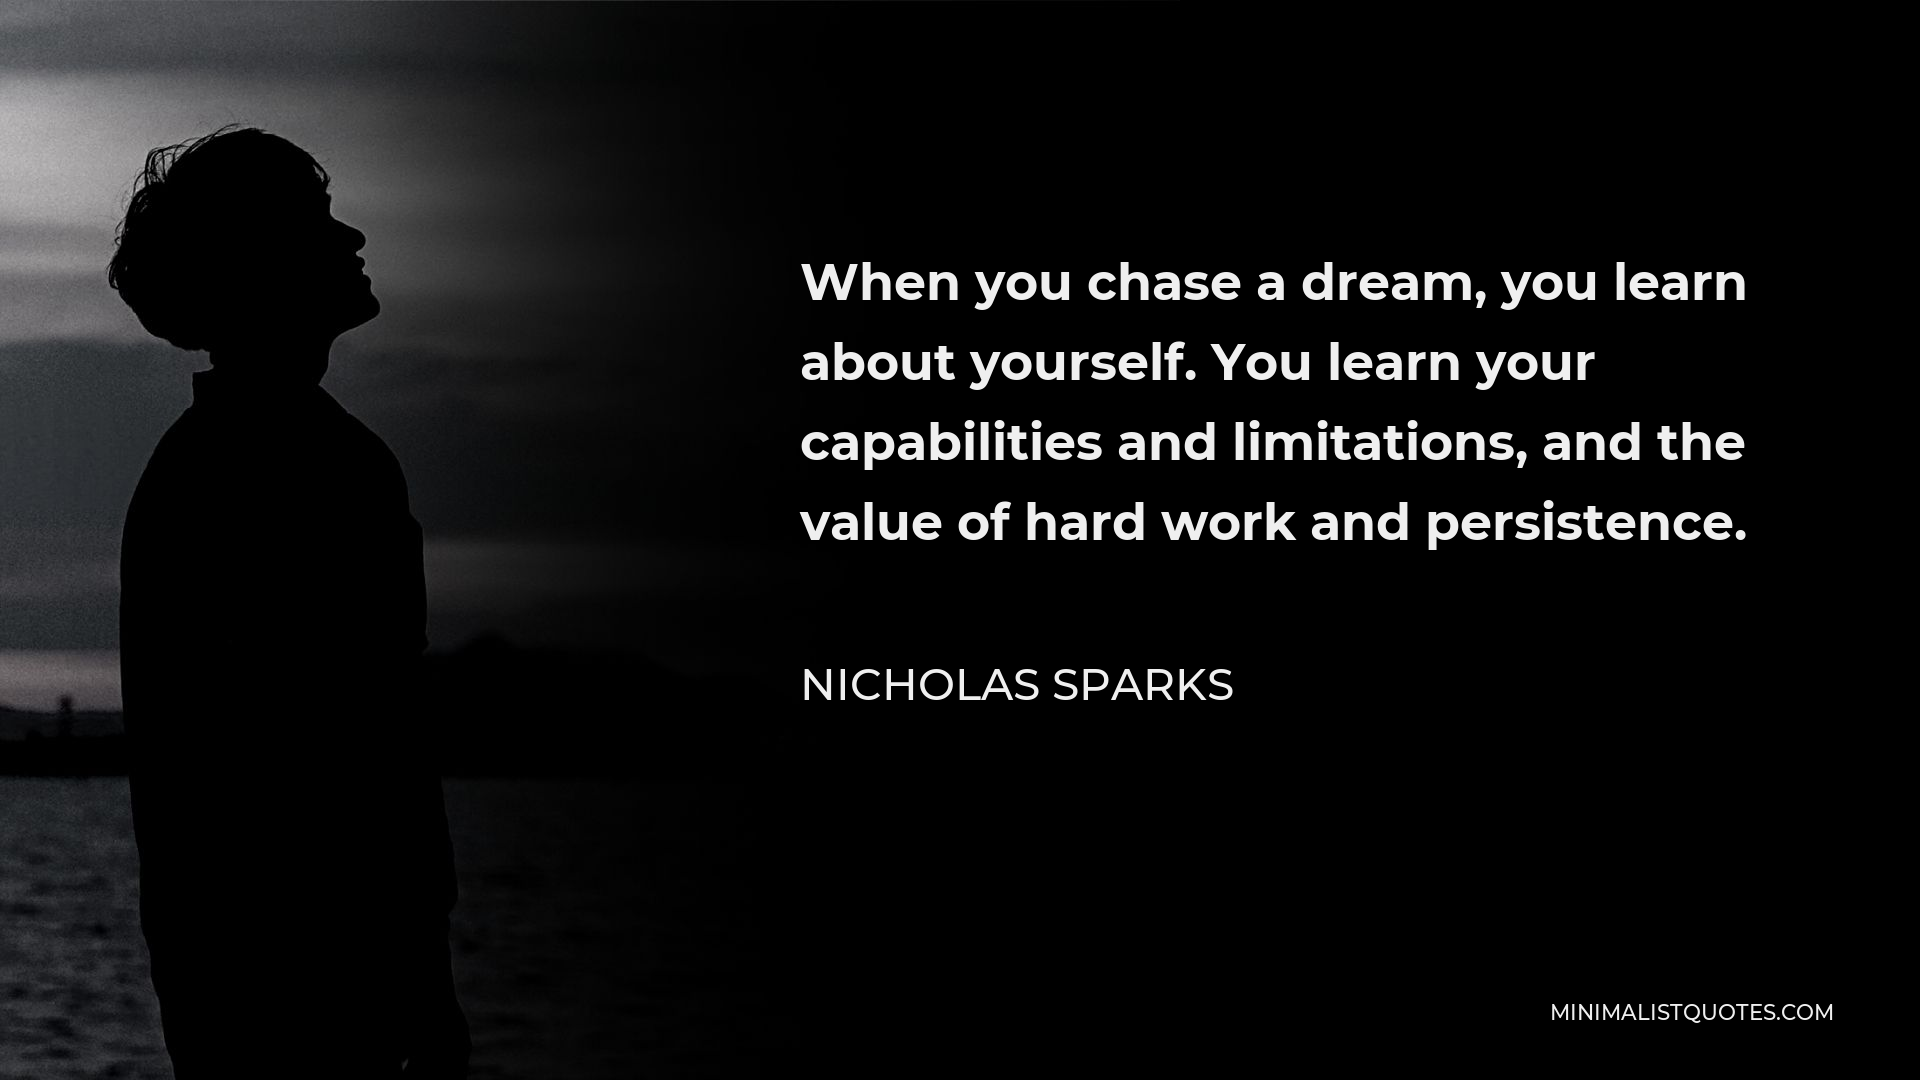 Nicholas Sparks Quote - When you chase a dream, you learn about yourself. You learn your capabilities and limitations, and the value of hard work and persistence.